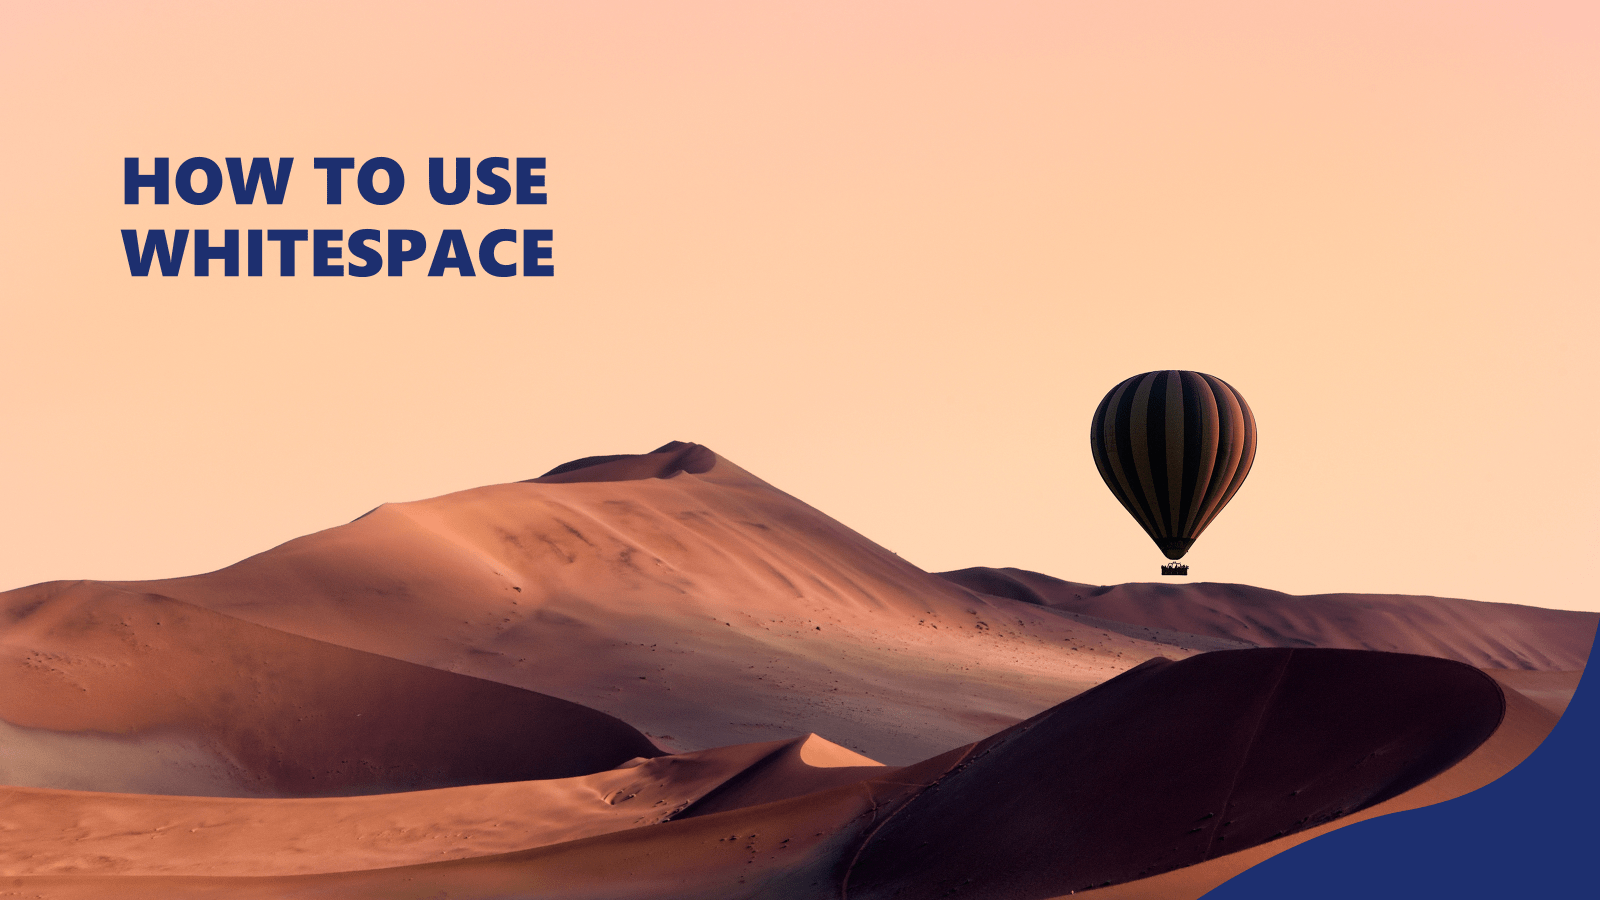 Background image is sand dunes, a yellow sky and a single hot air balloon to the right. On the left is the title: How to use whitespace. 